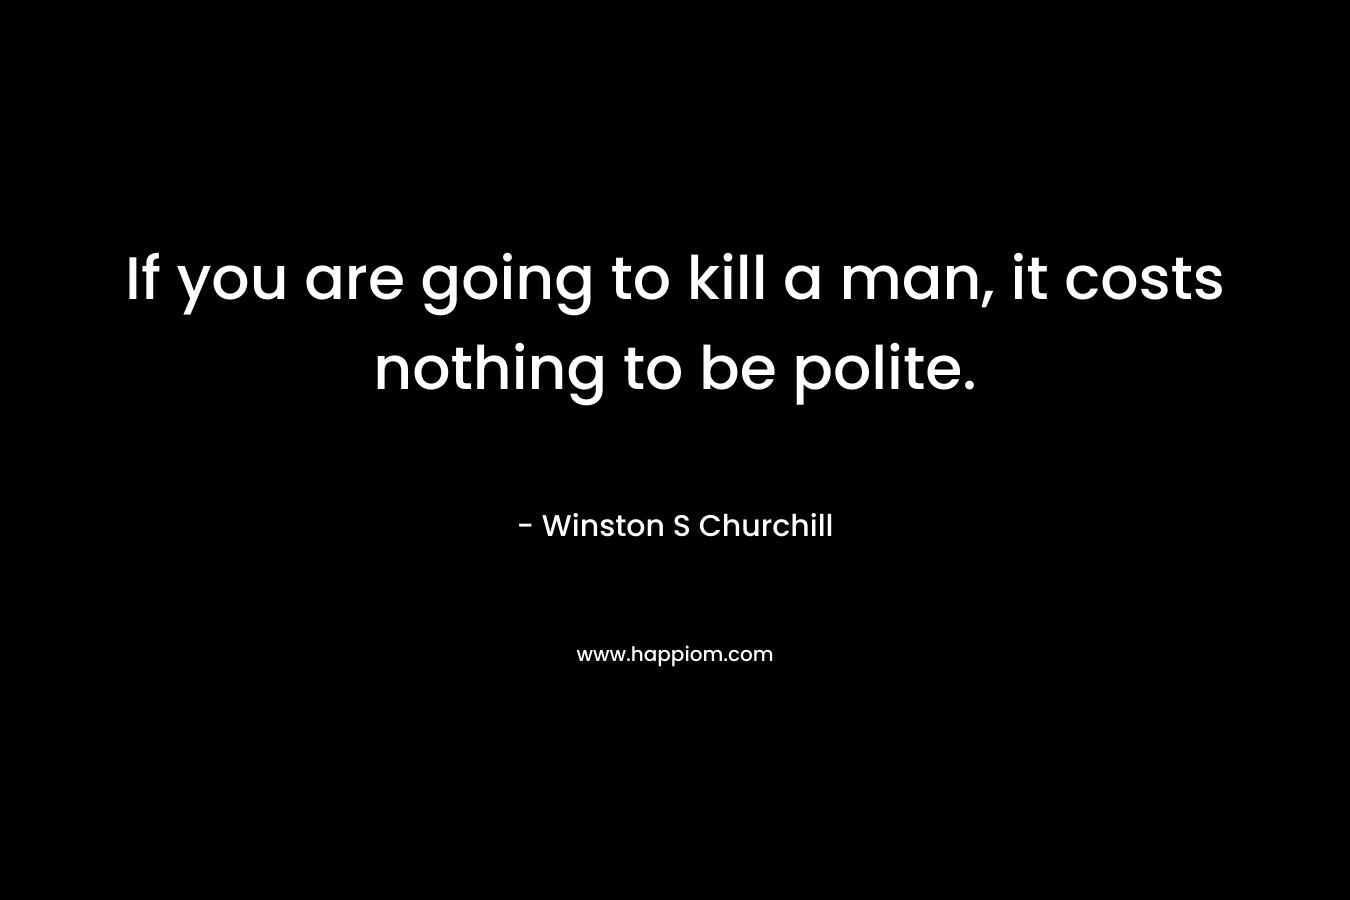 If you are going to kill a man, it costs nothing to be polite.